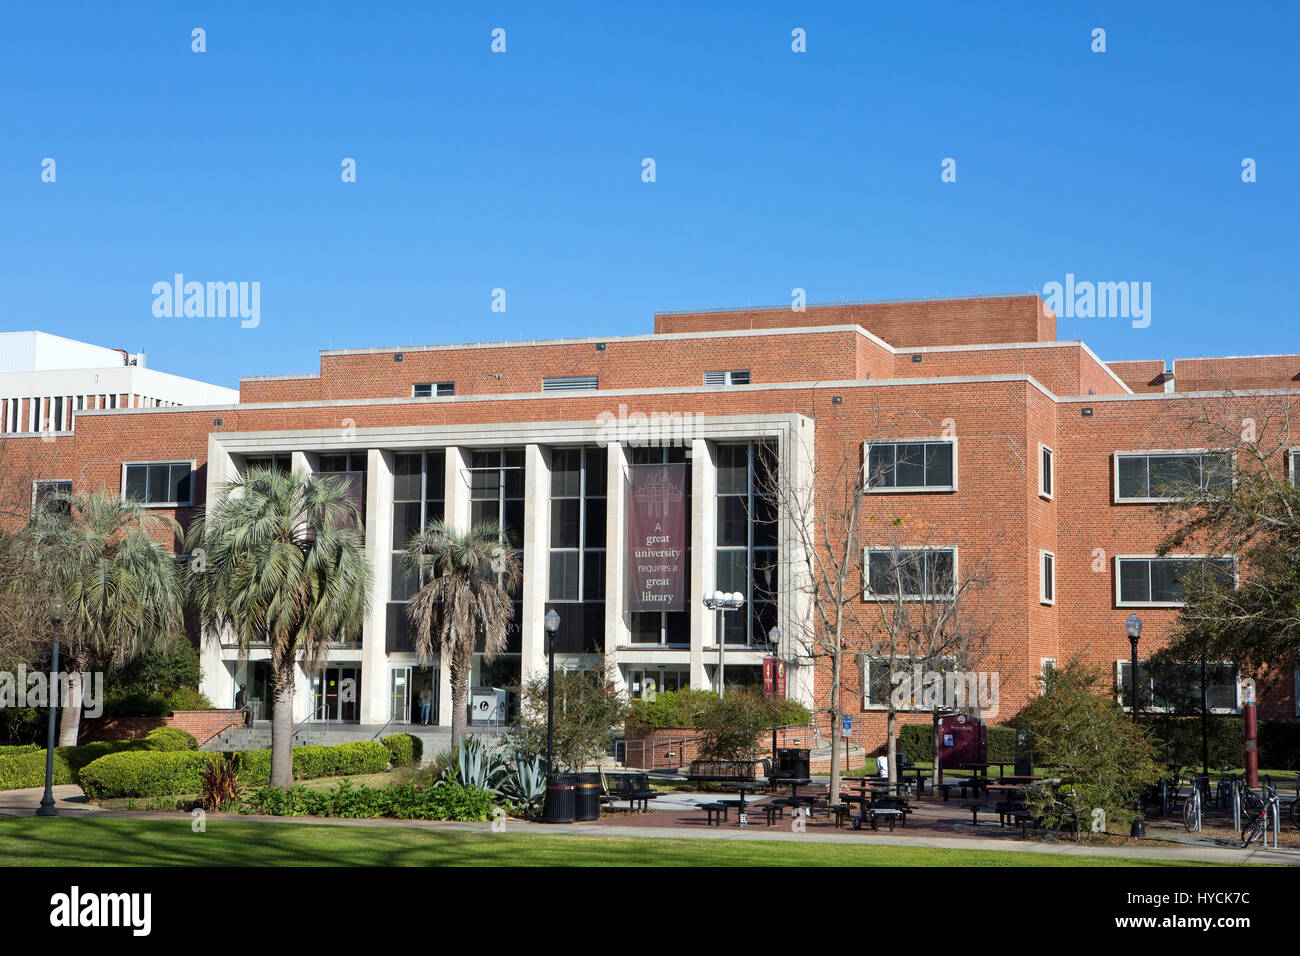 Entrance to the main library on the campus of Florida State University located in Tallahassee, Florida, USA. Stock Photo